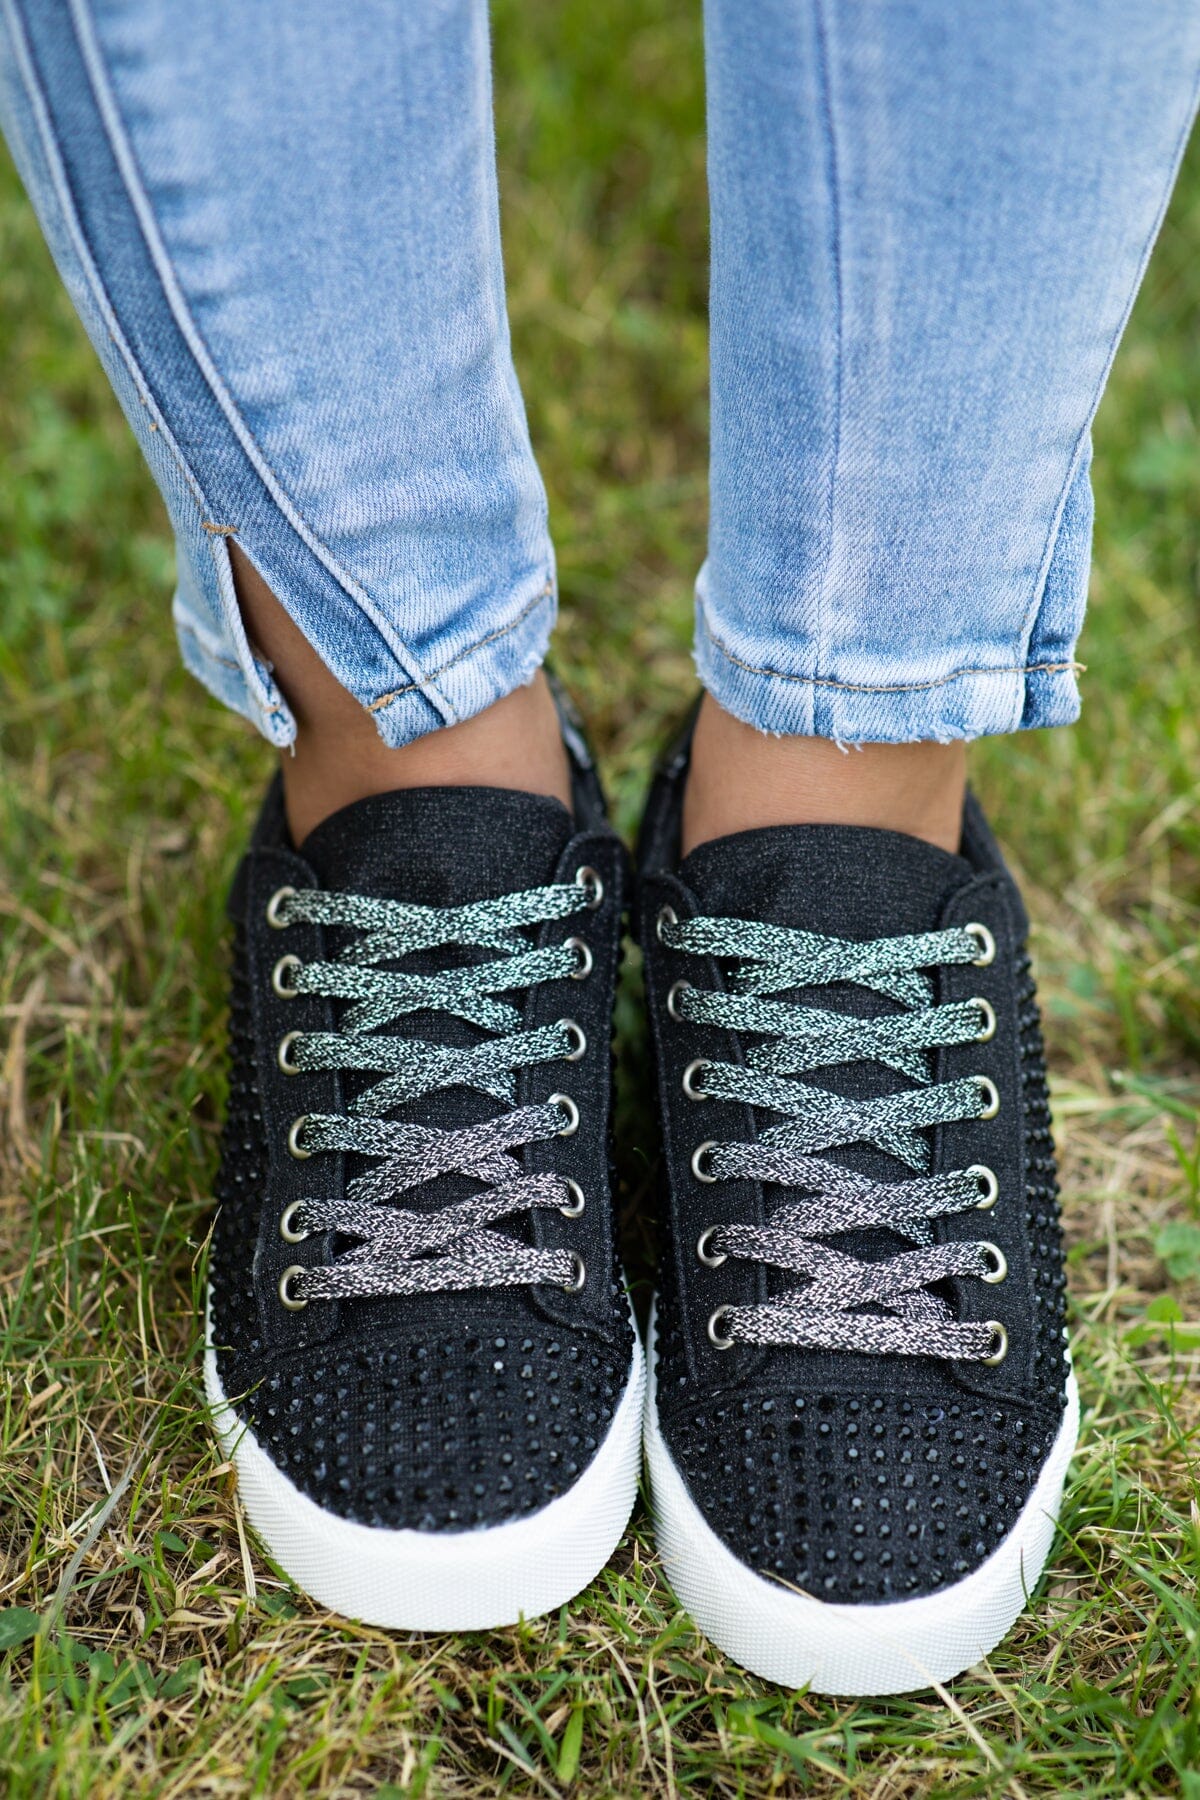 Black Studded Platform Sneakers - Filly Flair